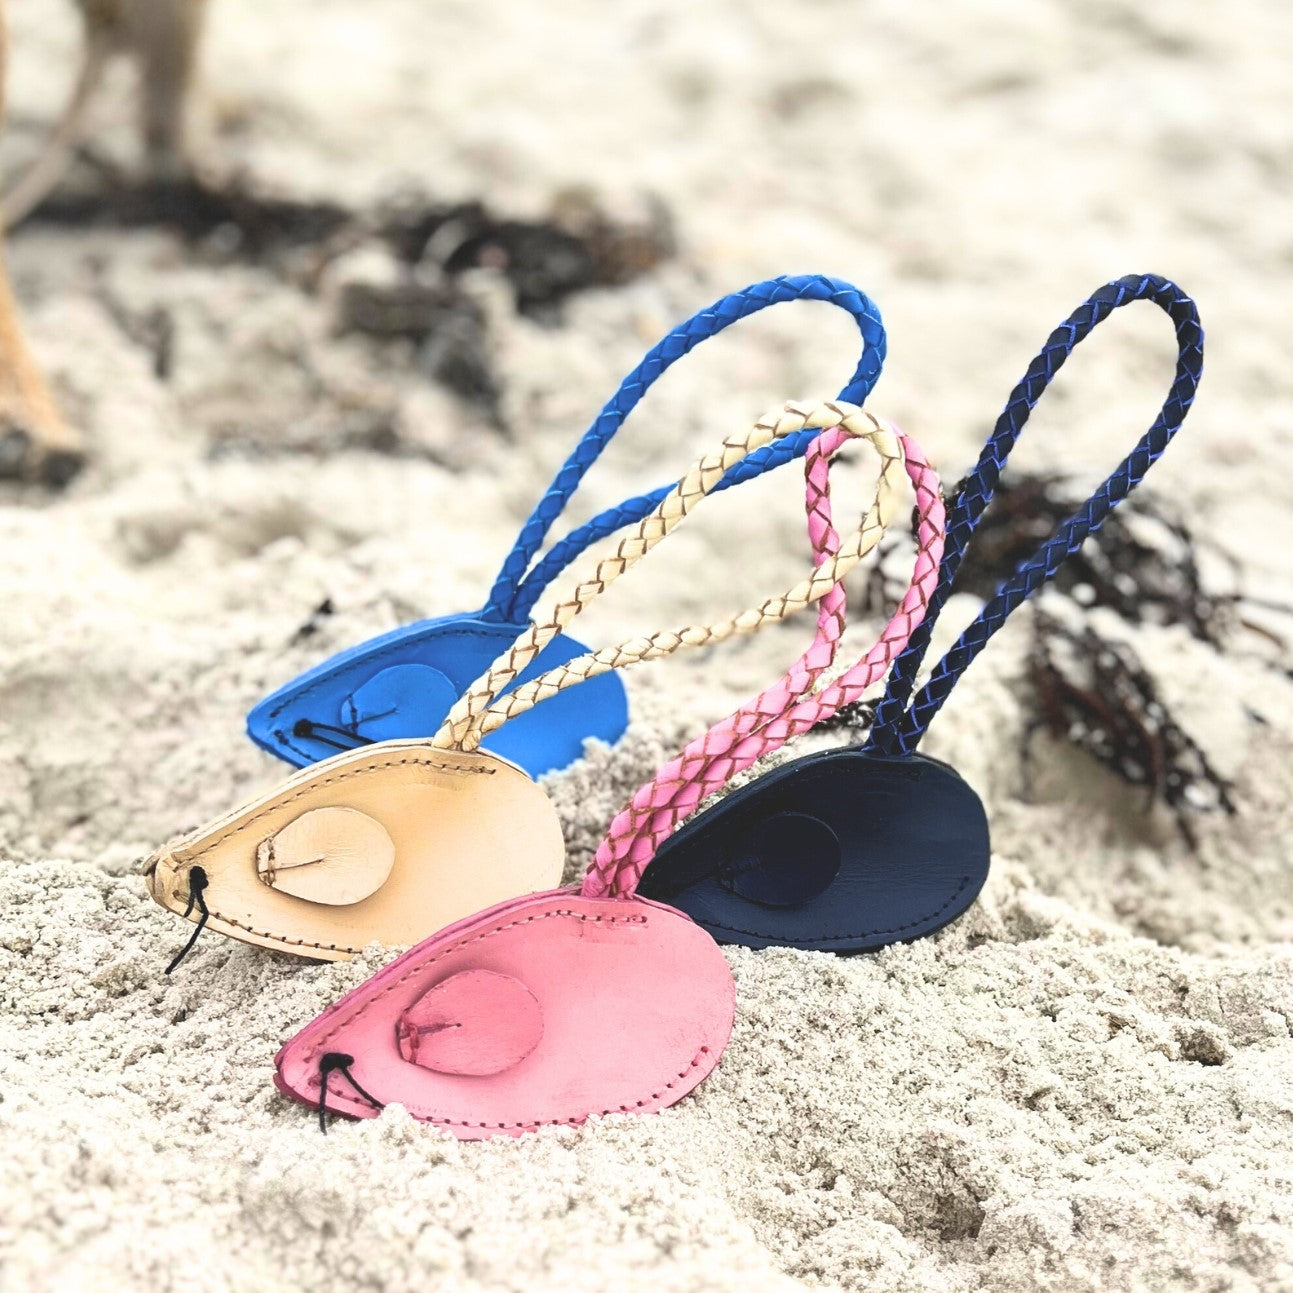 Four Georgie Paws compostable flip-flops with braided straps stand toe-first in sand, symbolizing leisure and beach life, with a hint of ocean debris in the background, suggesting a need for coastal conservation.